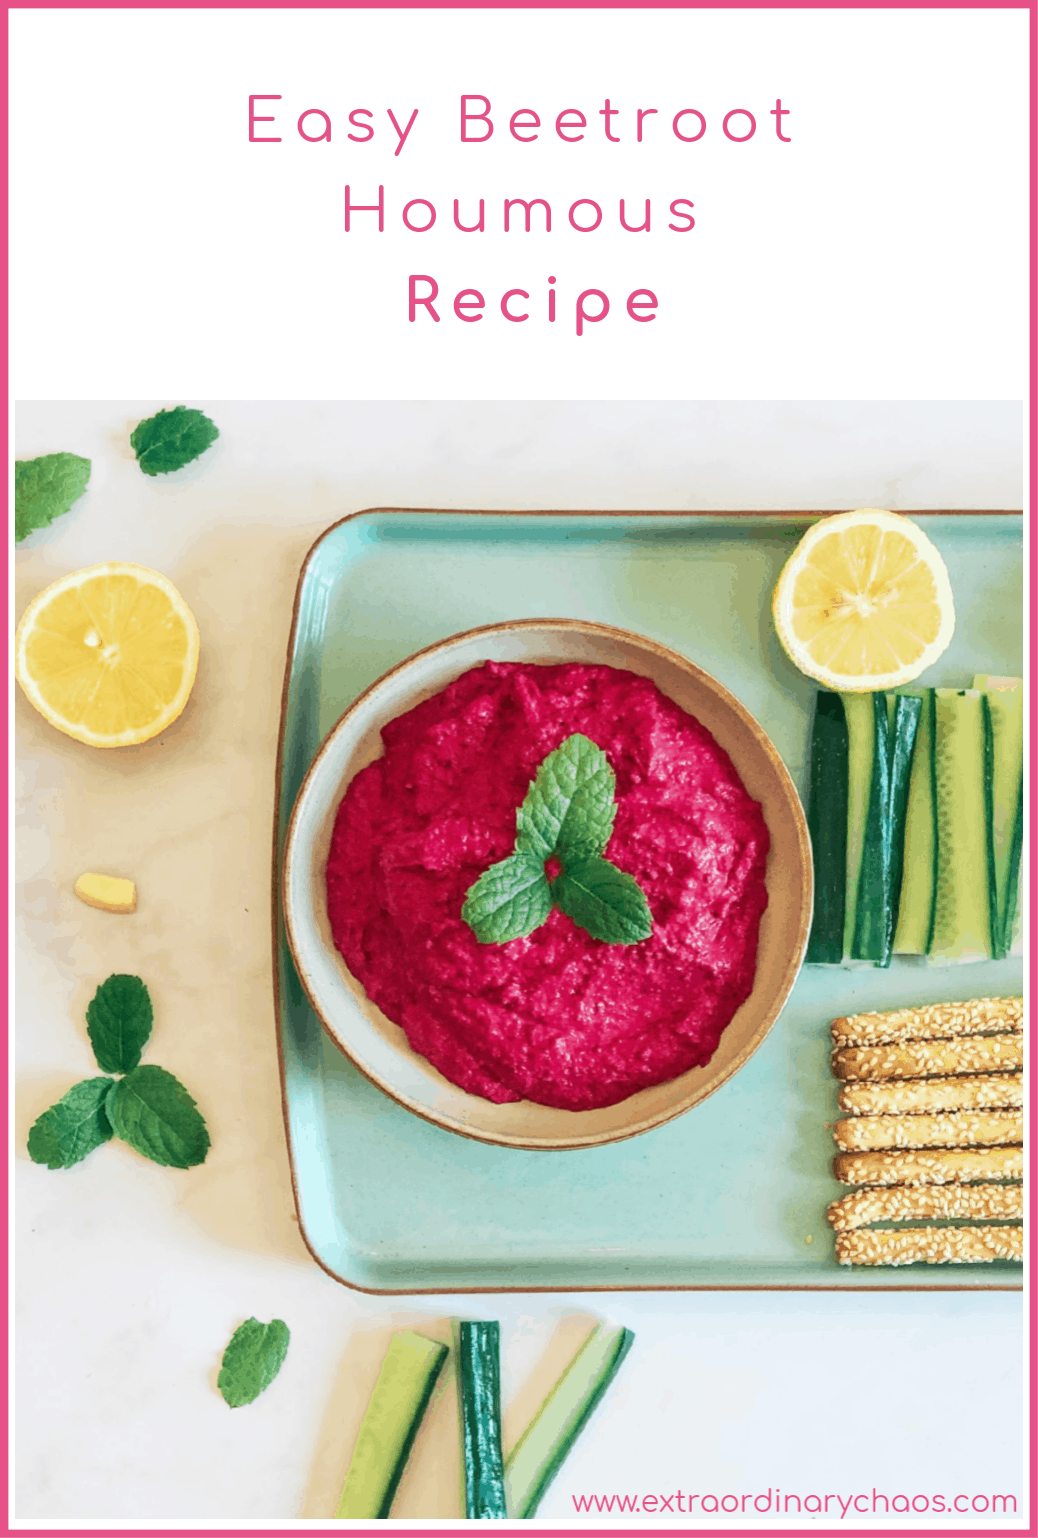 Easy Beetroot Houmous  Recipe perfect for salads and BBQs, made iwht steamed beetroot and tinned chickpeas for a recipe in under 15 minutes #BeetrootRecipe #HomemadeHoumous